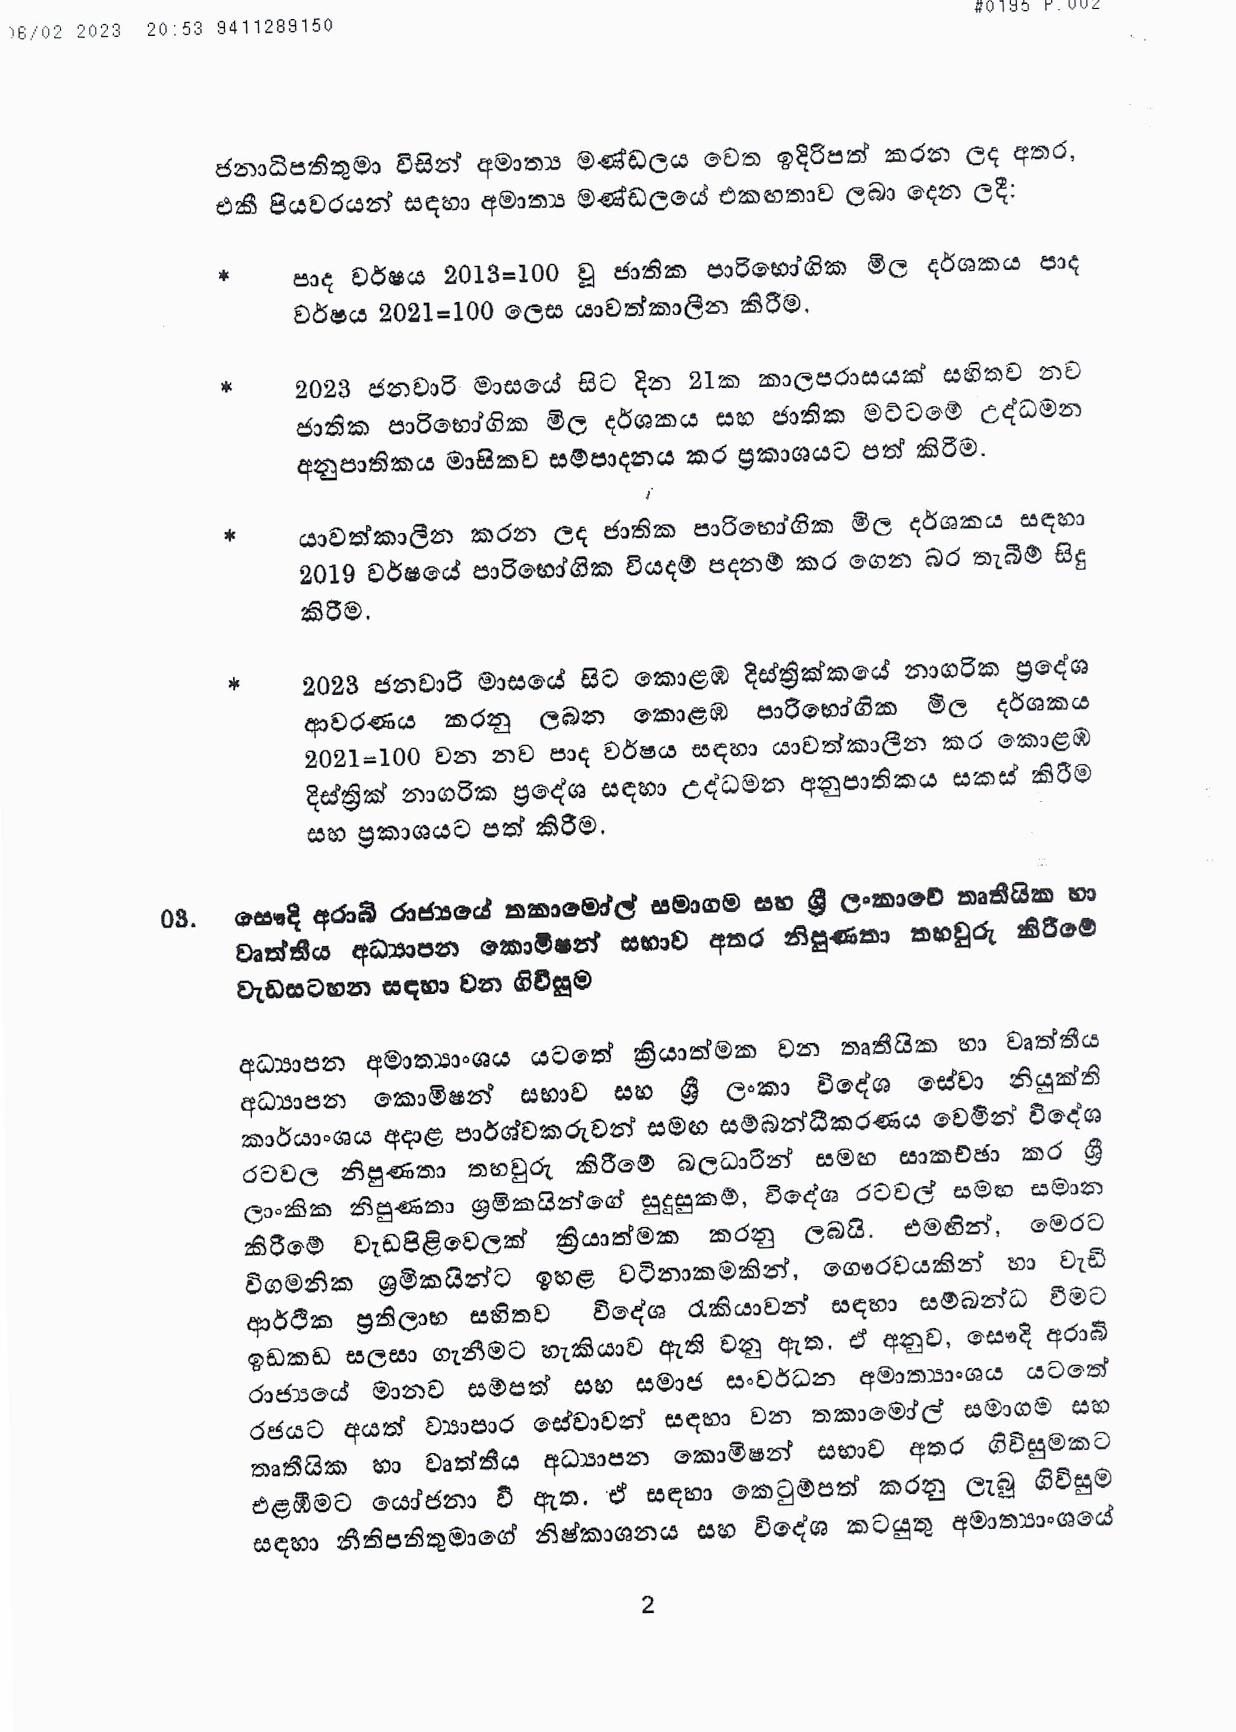 Cabinet Decision on 06.02.2023 page 002